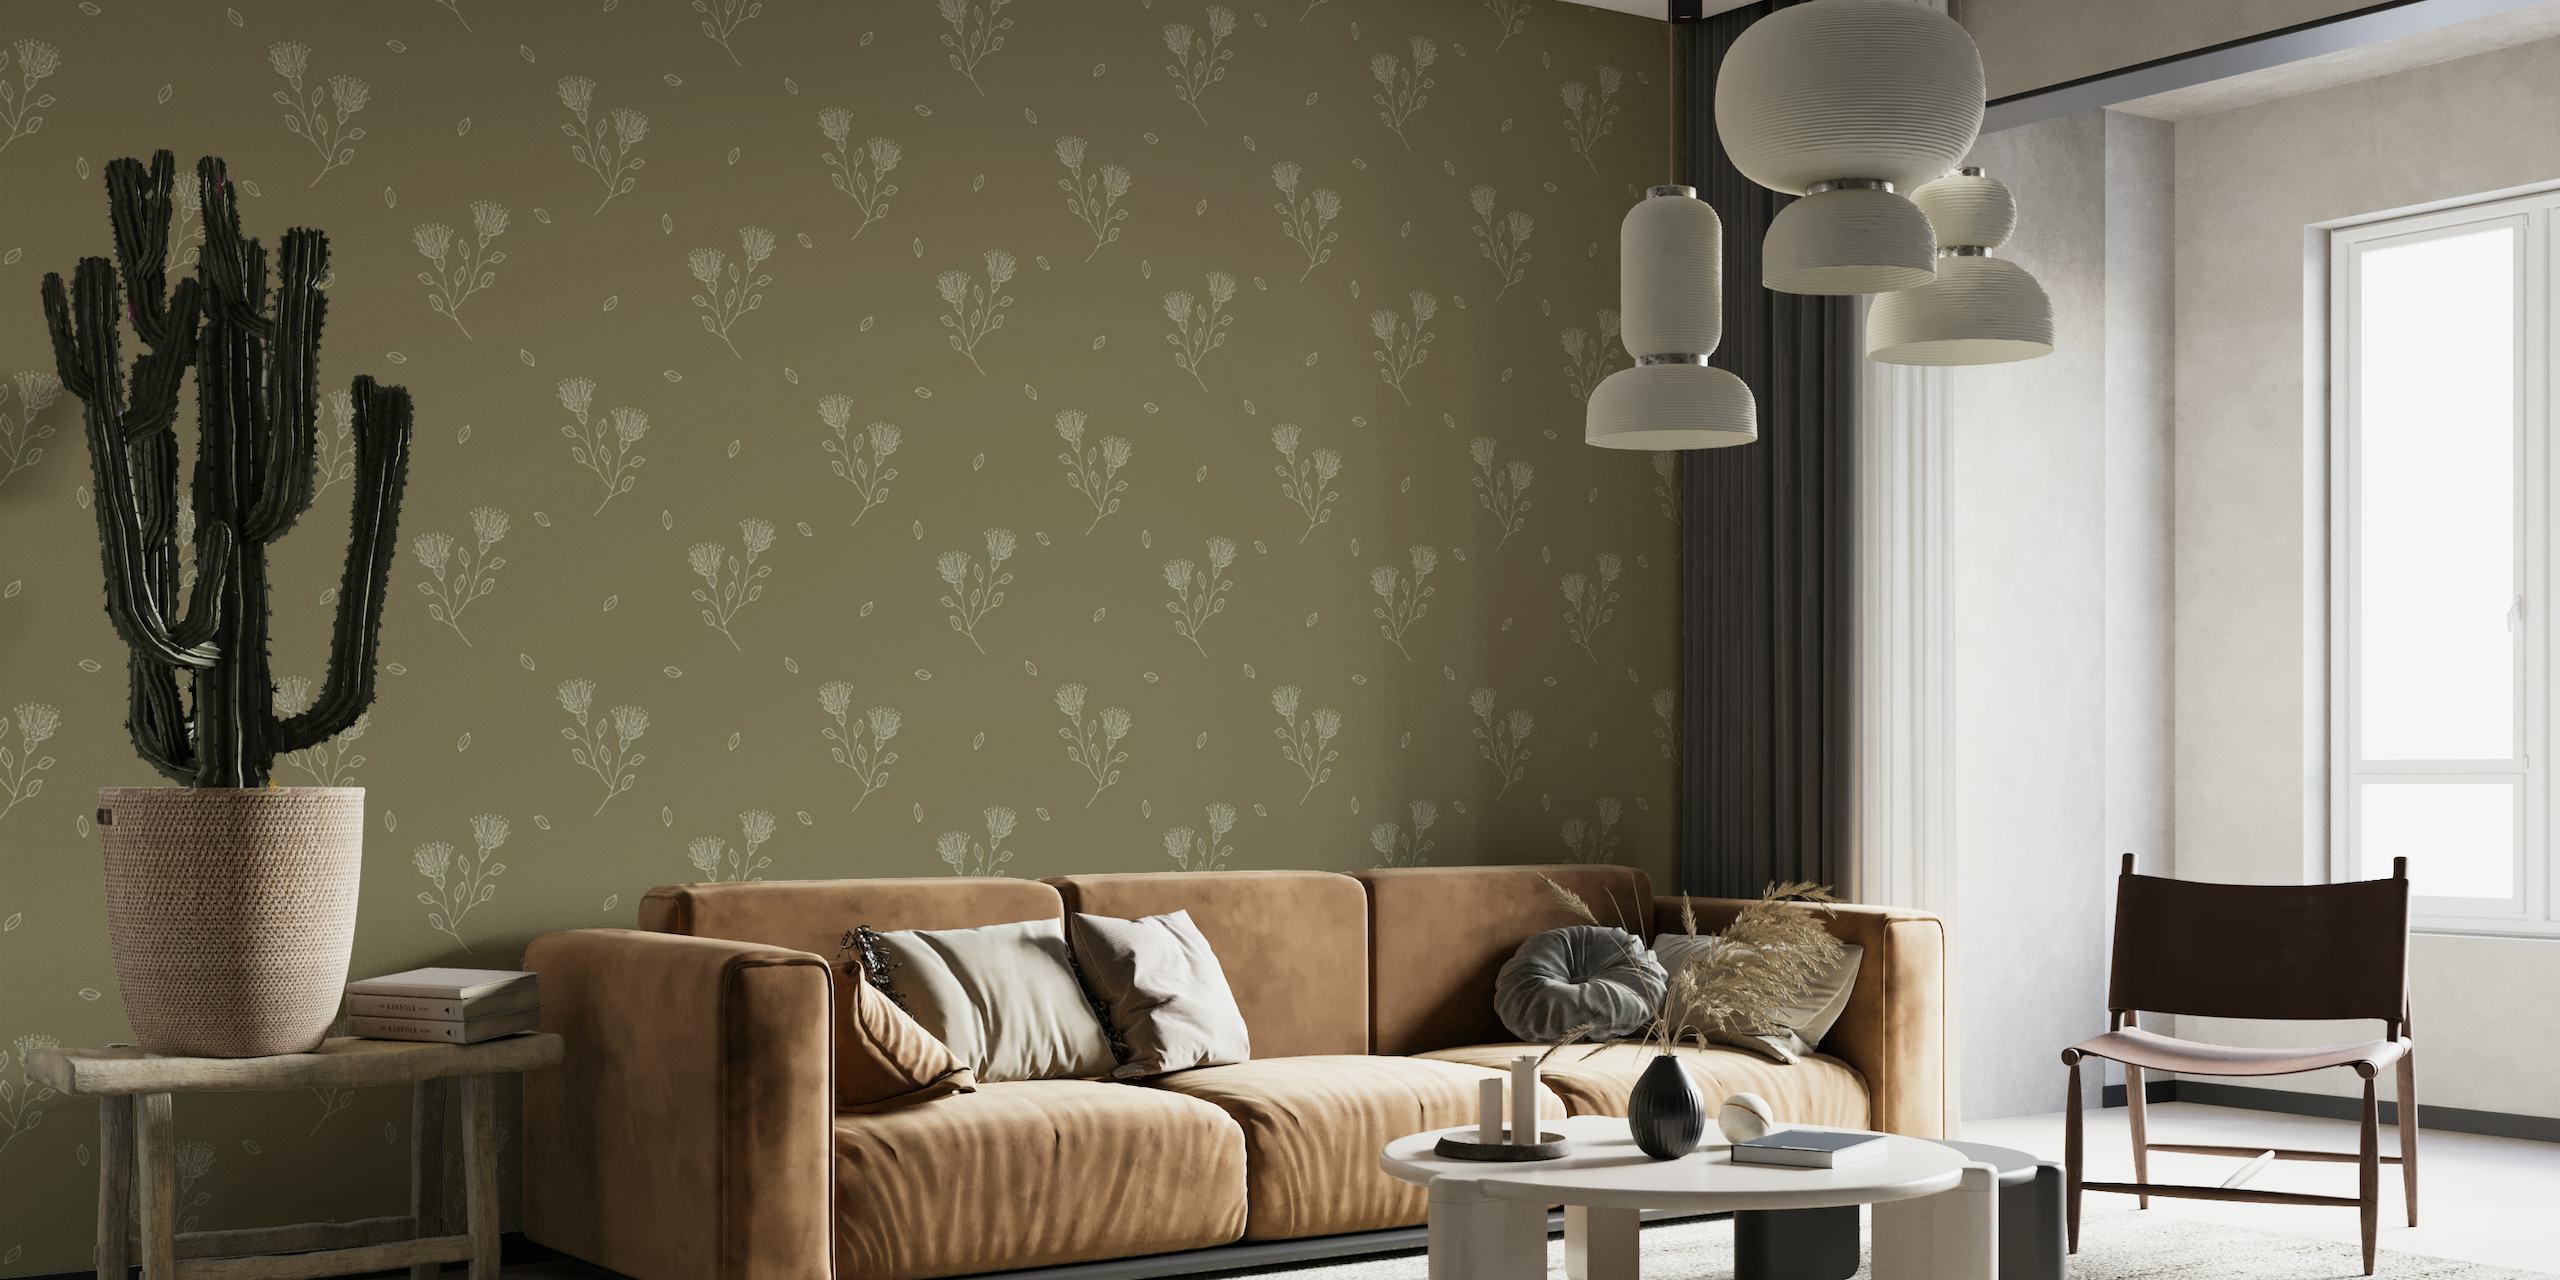 Earthy-toned wall mural with delicate floral patterns for a minimalistic aesthetic